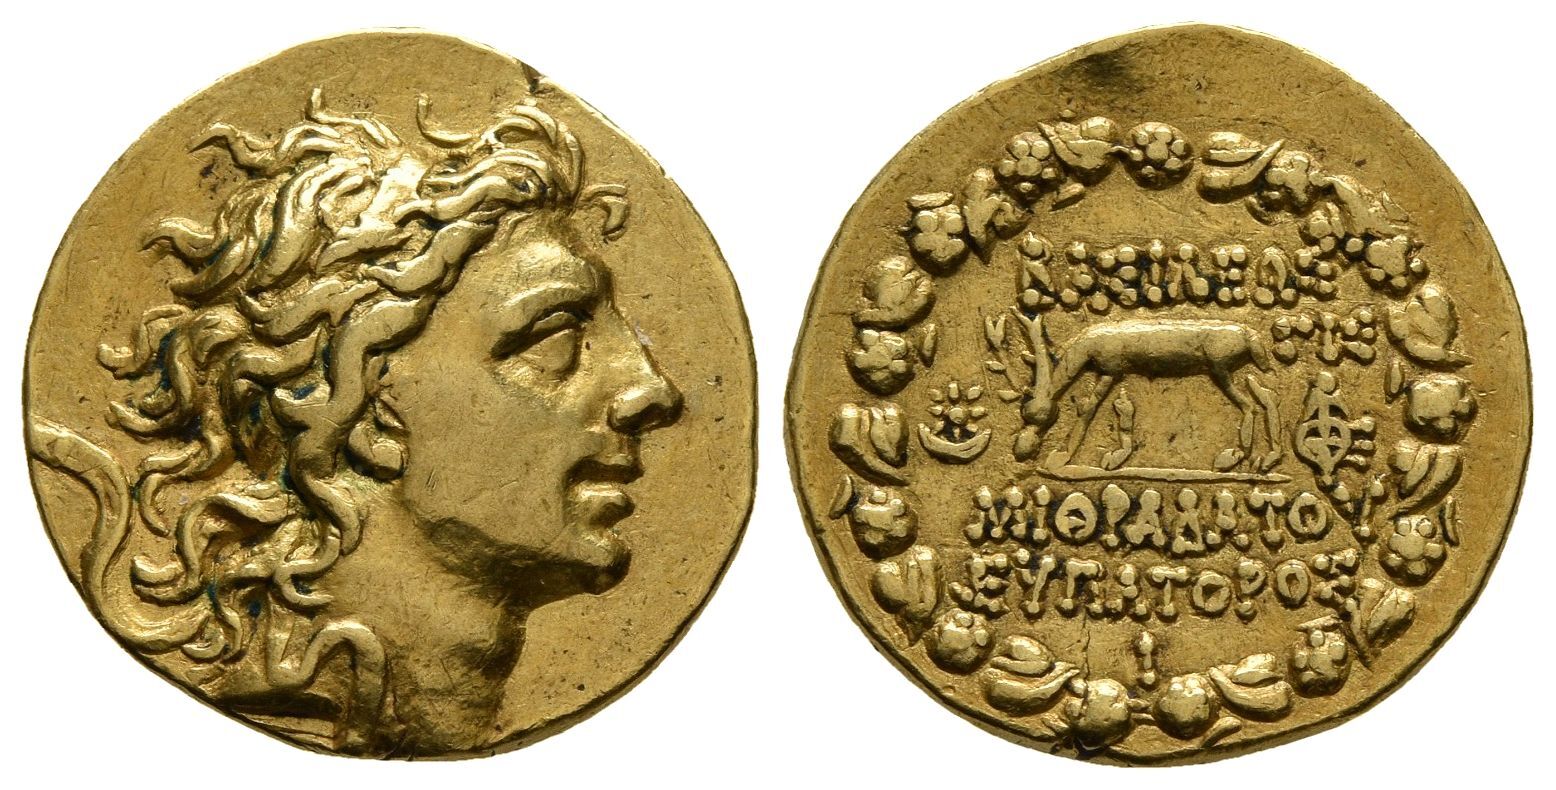 A Stater of Mithradates VI, a Significant Figure from the Ancient World